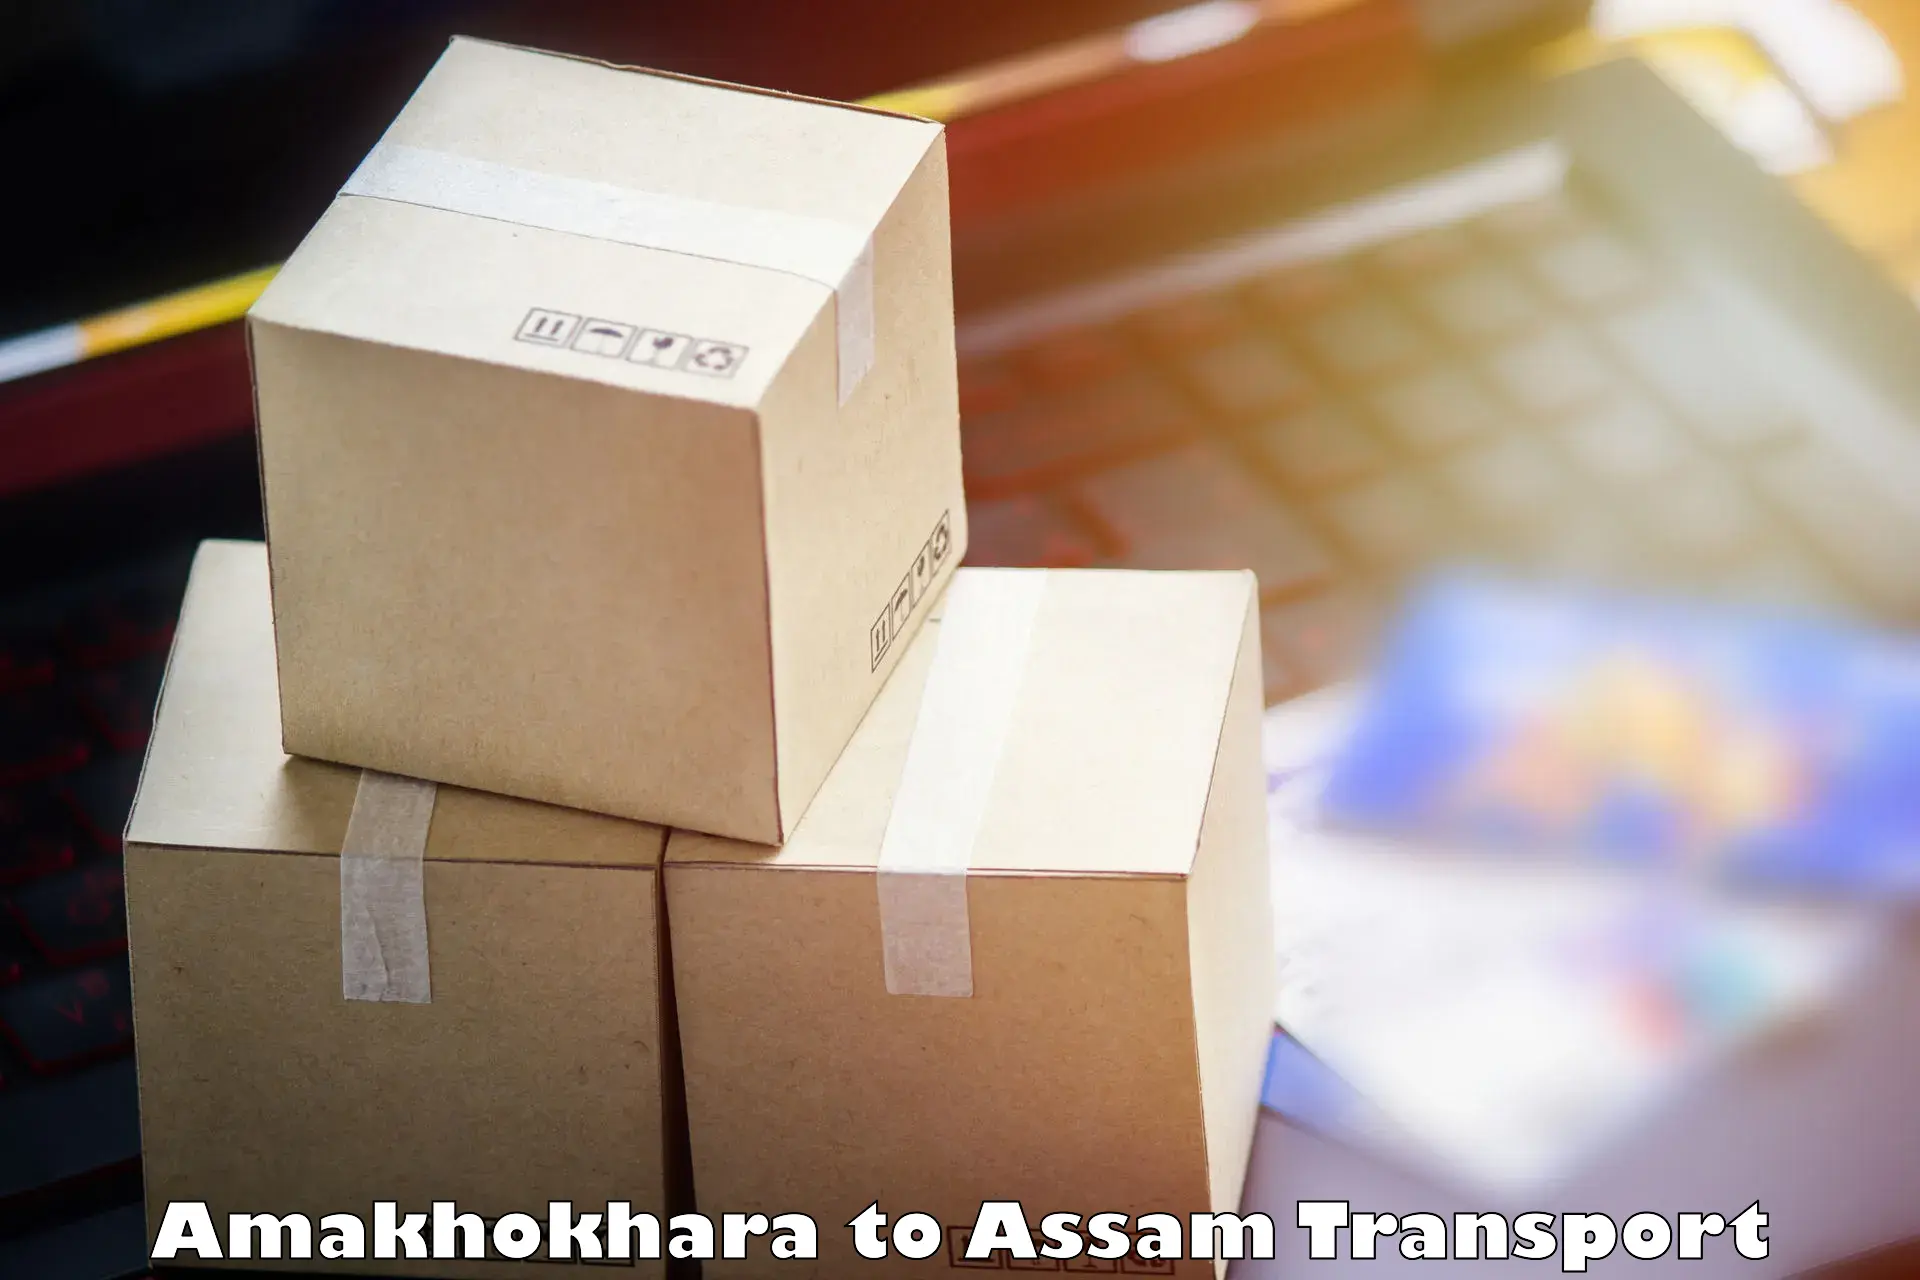 Cargo train transport services Amakhokhara to Howraghat